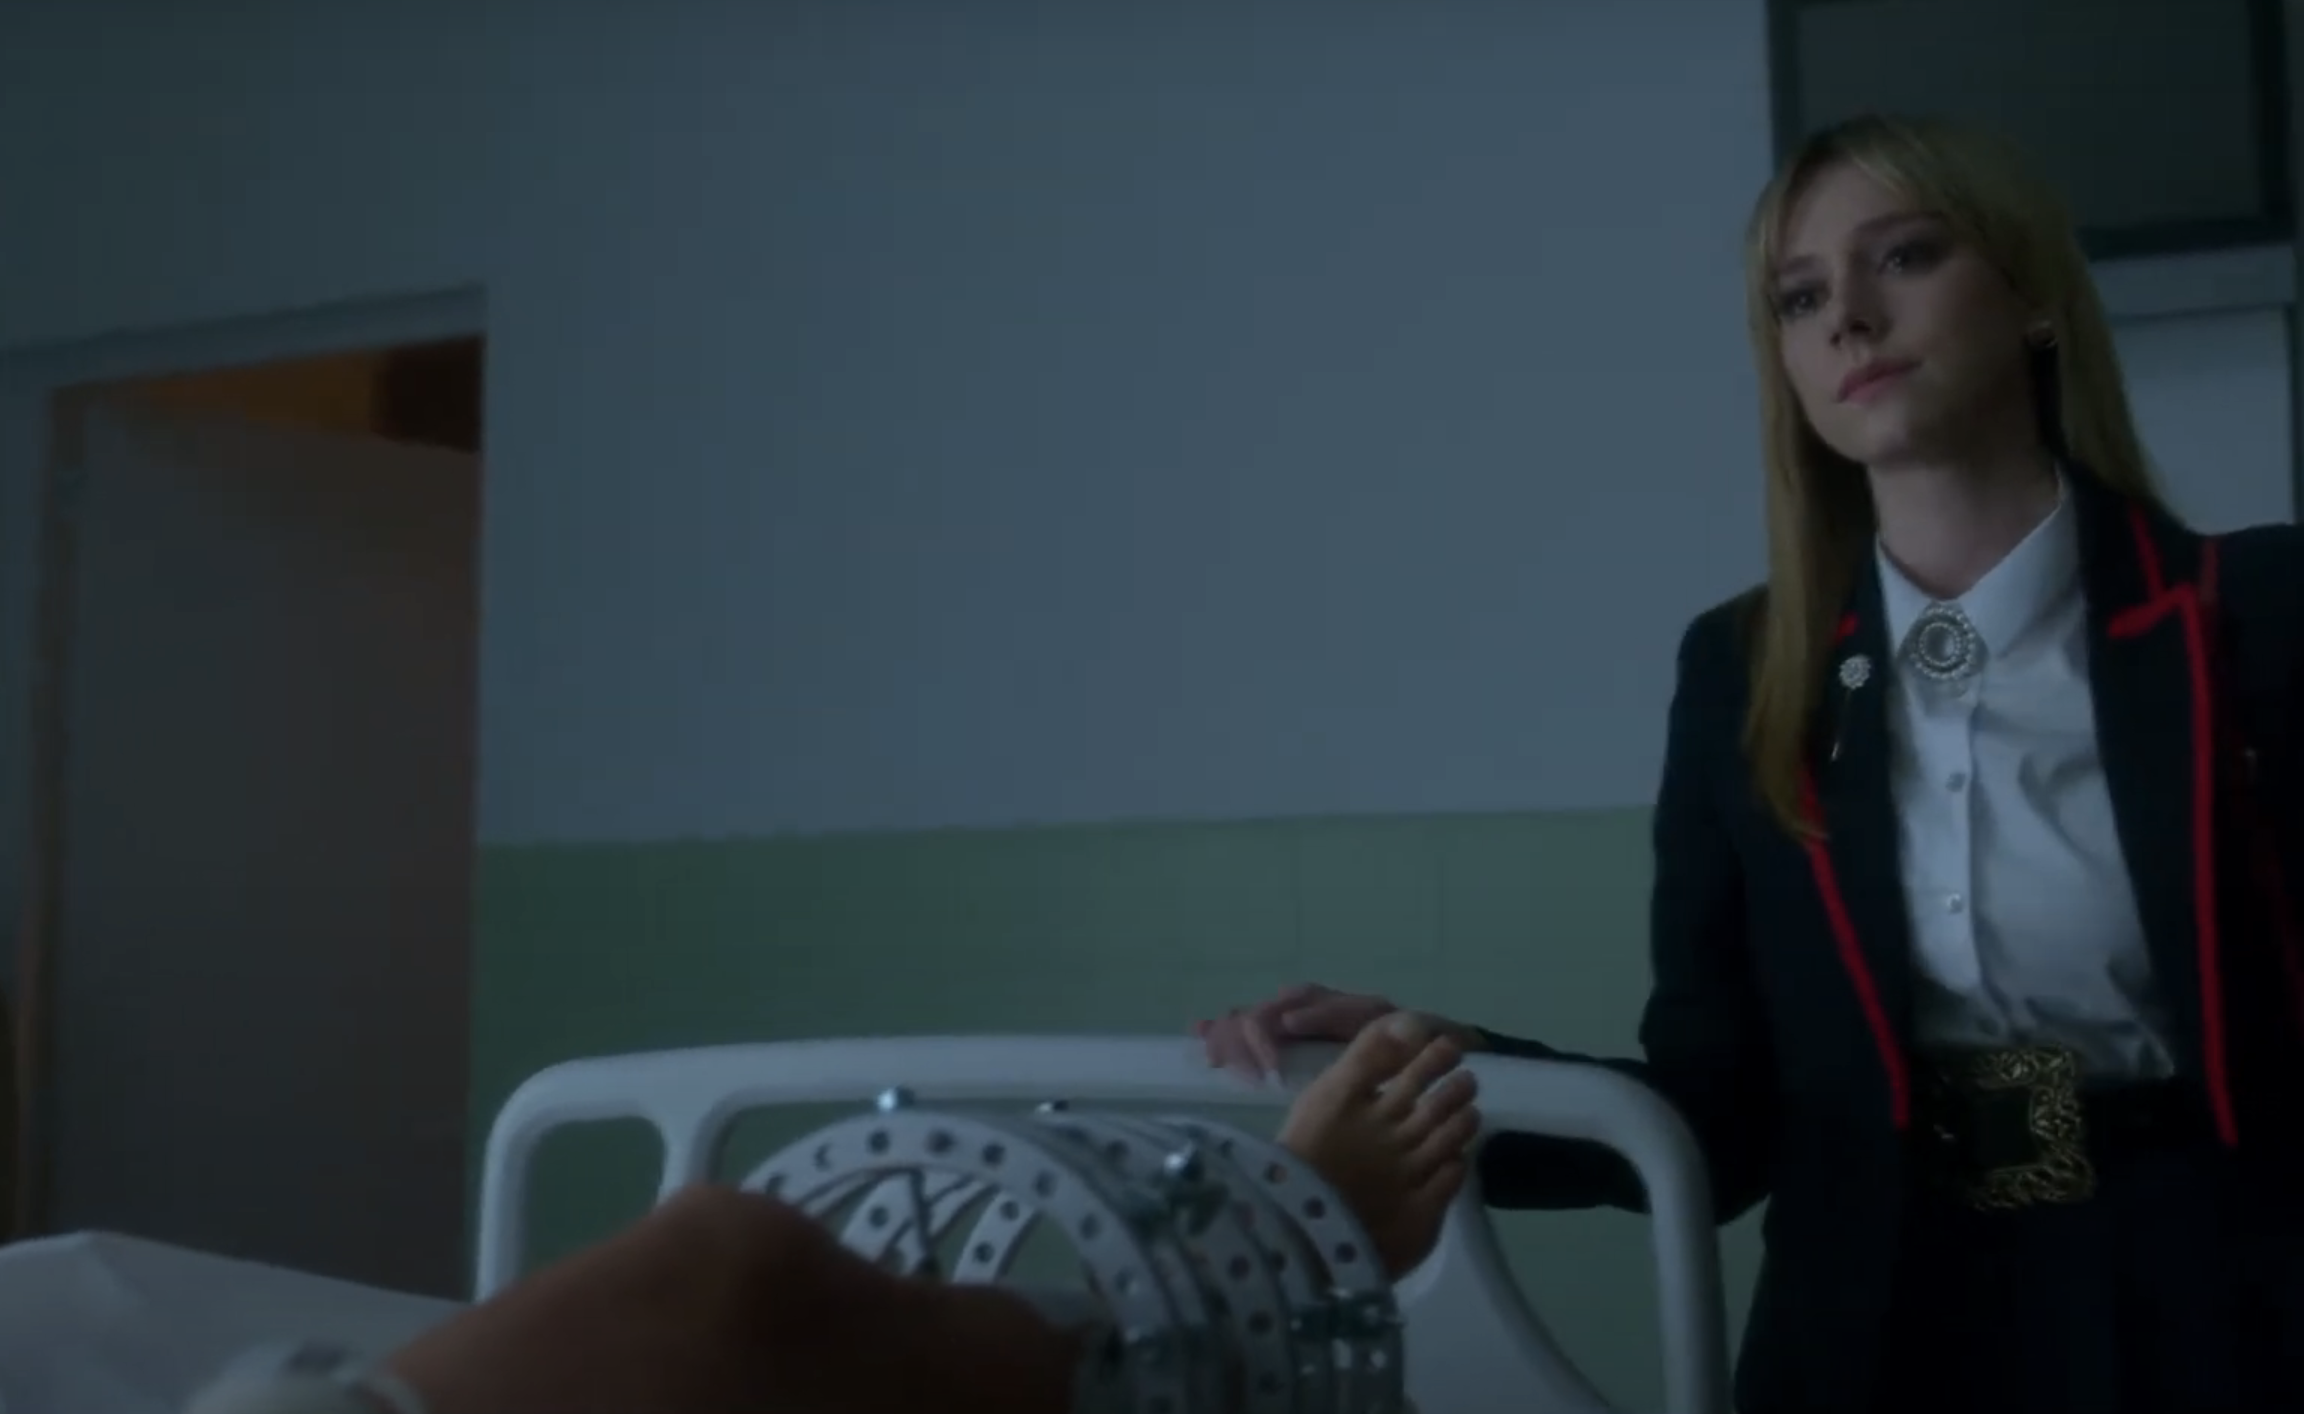 Carla from Elite series standing by a hospital bed